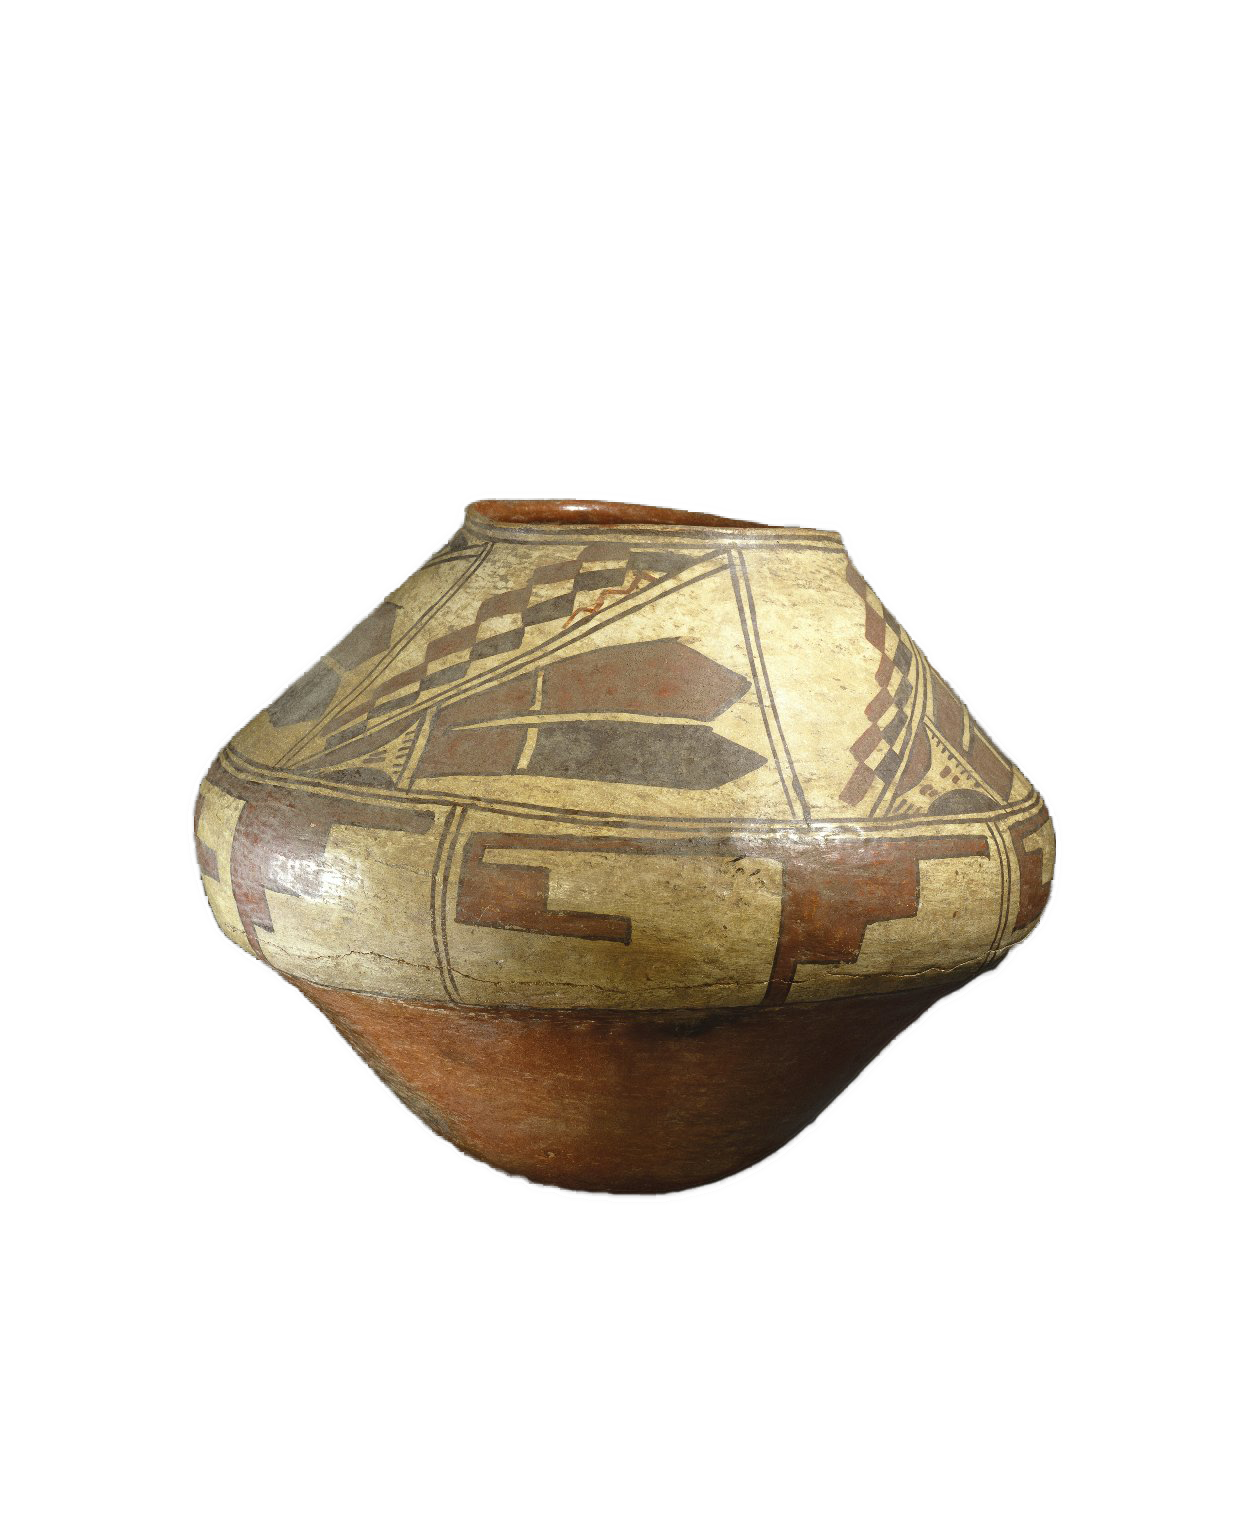 She-we-na (Zuni Pueblo) Polychrone water jar painted in the Ashiwi style using diagonal and alternating geometric shaped diamonds, stair step rectangles as well as feather-like red and dark motifs on with a white glazed background with a solid red base.